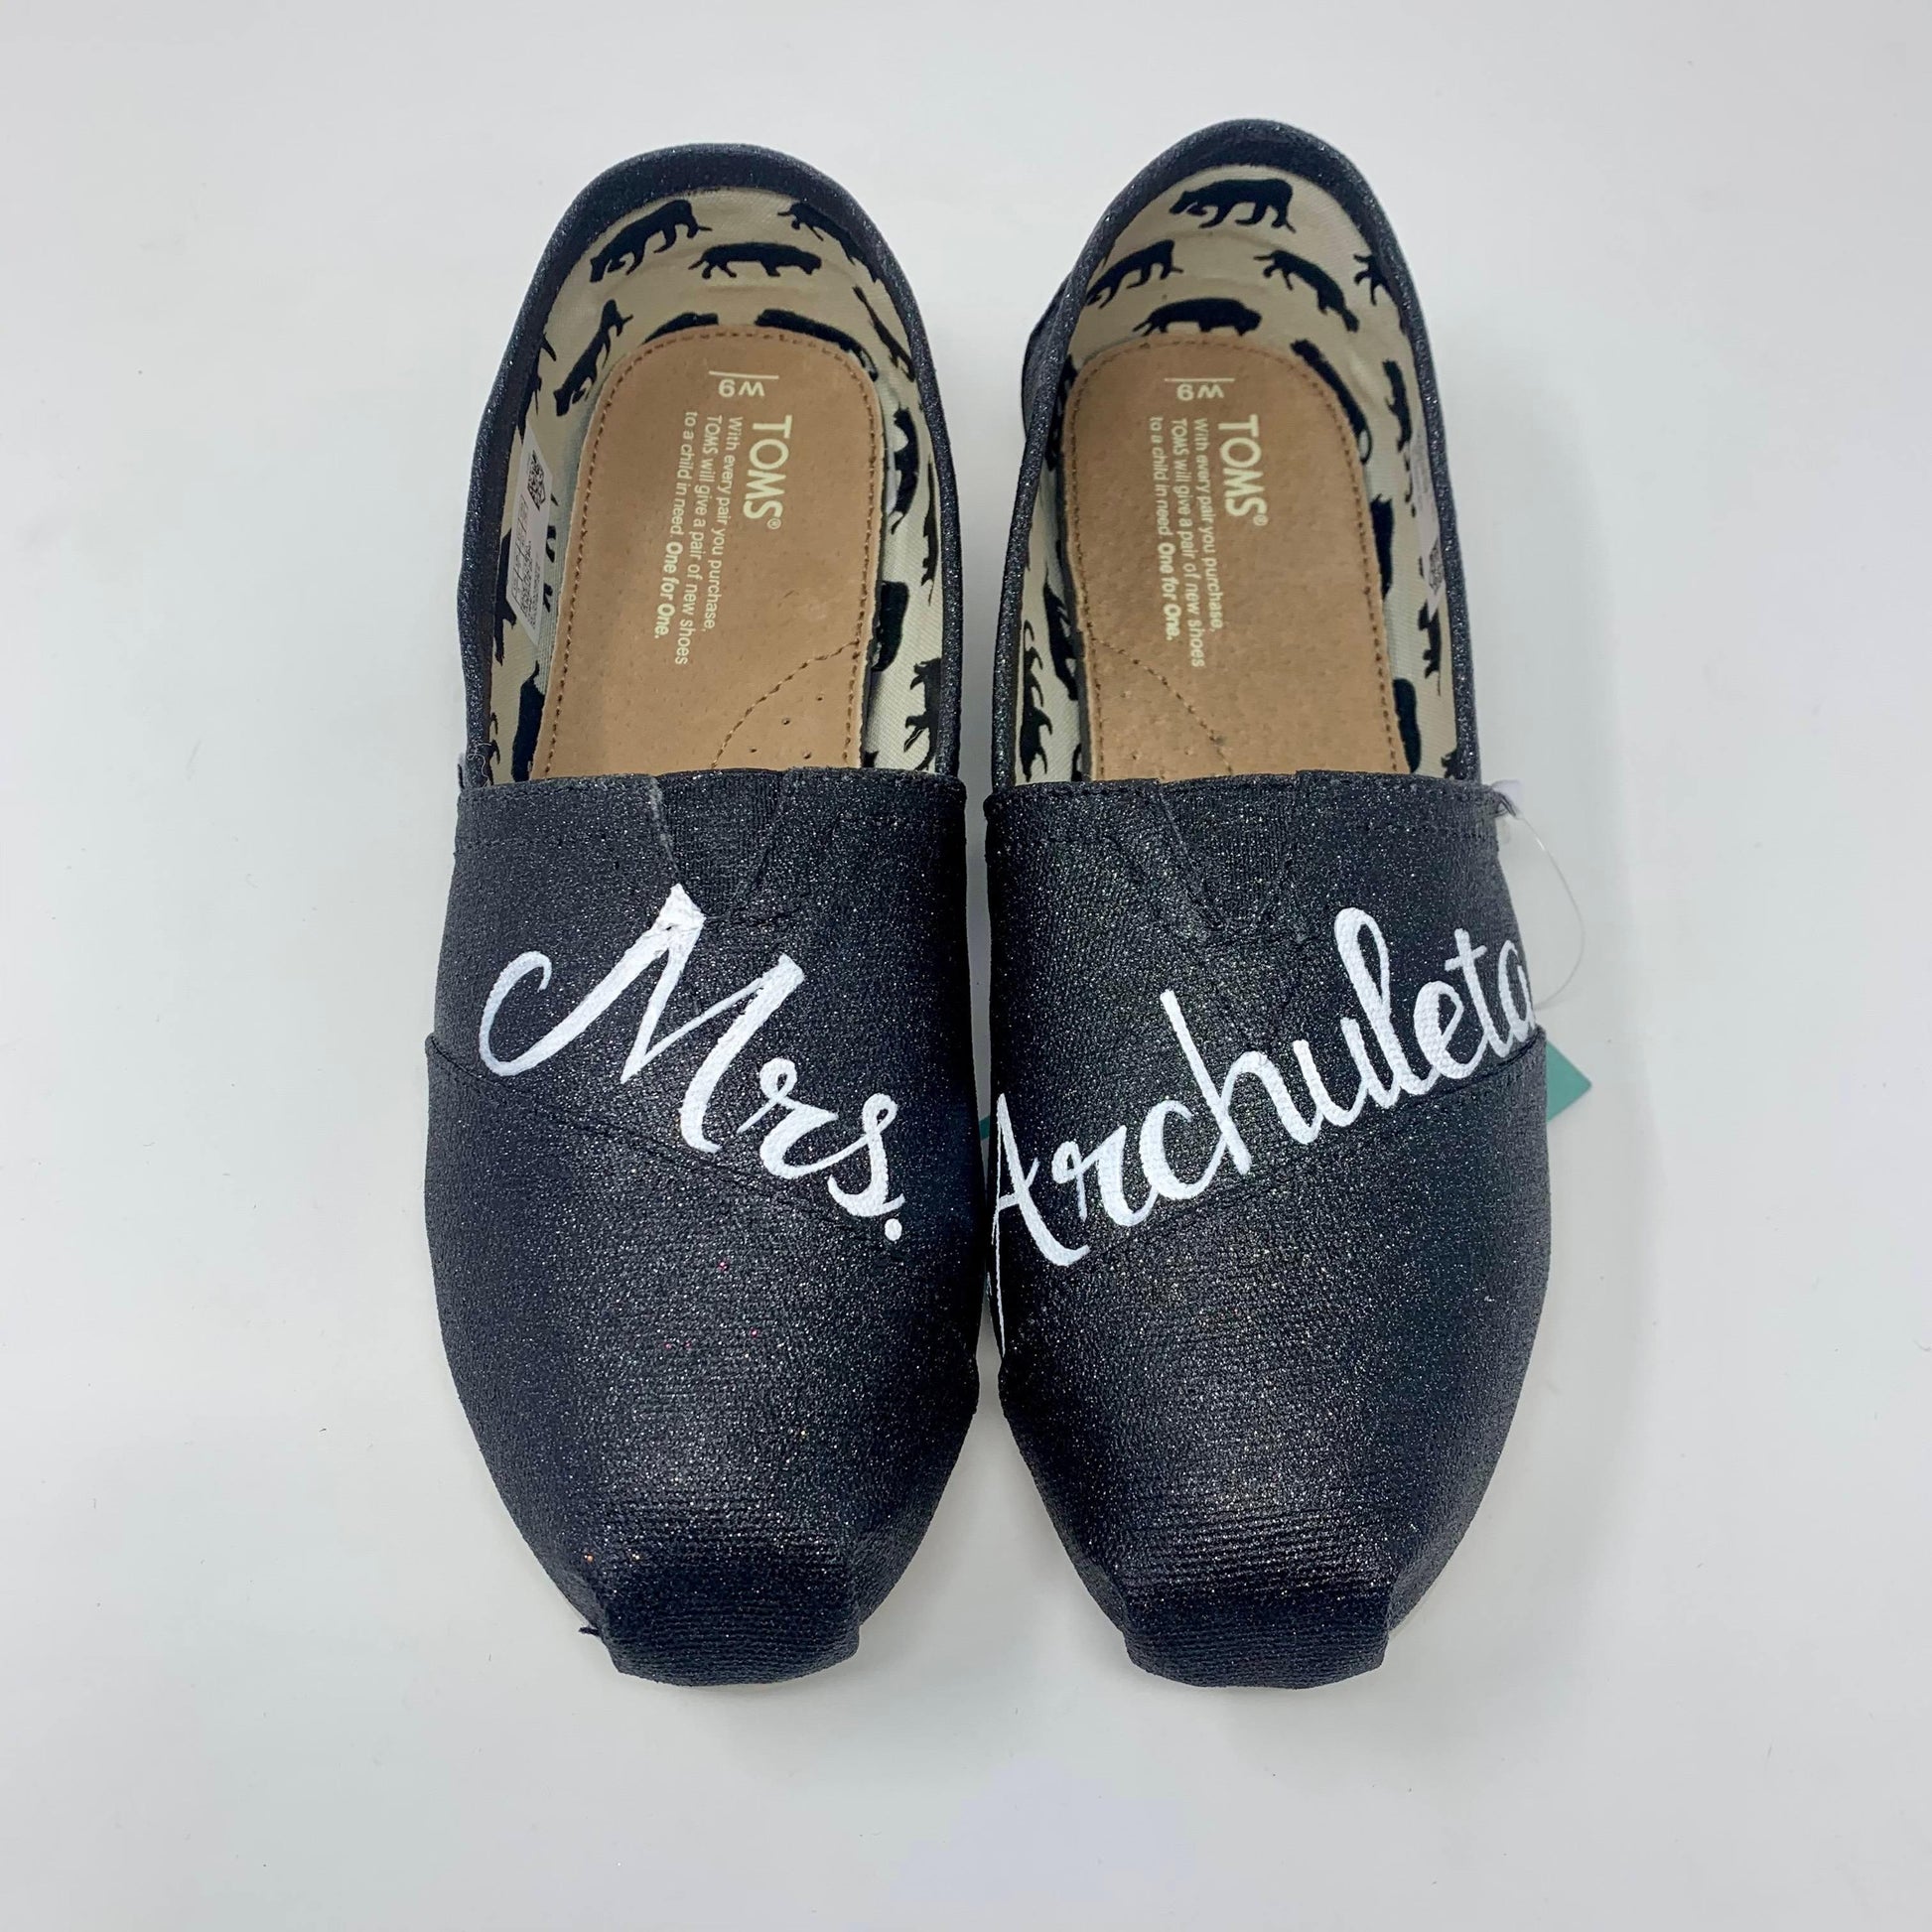 Black Glitter Wedding Shoes-Shoes-ButterMakesMeHappy